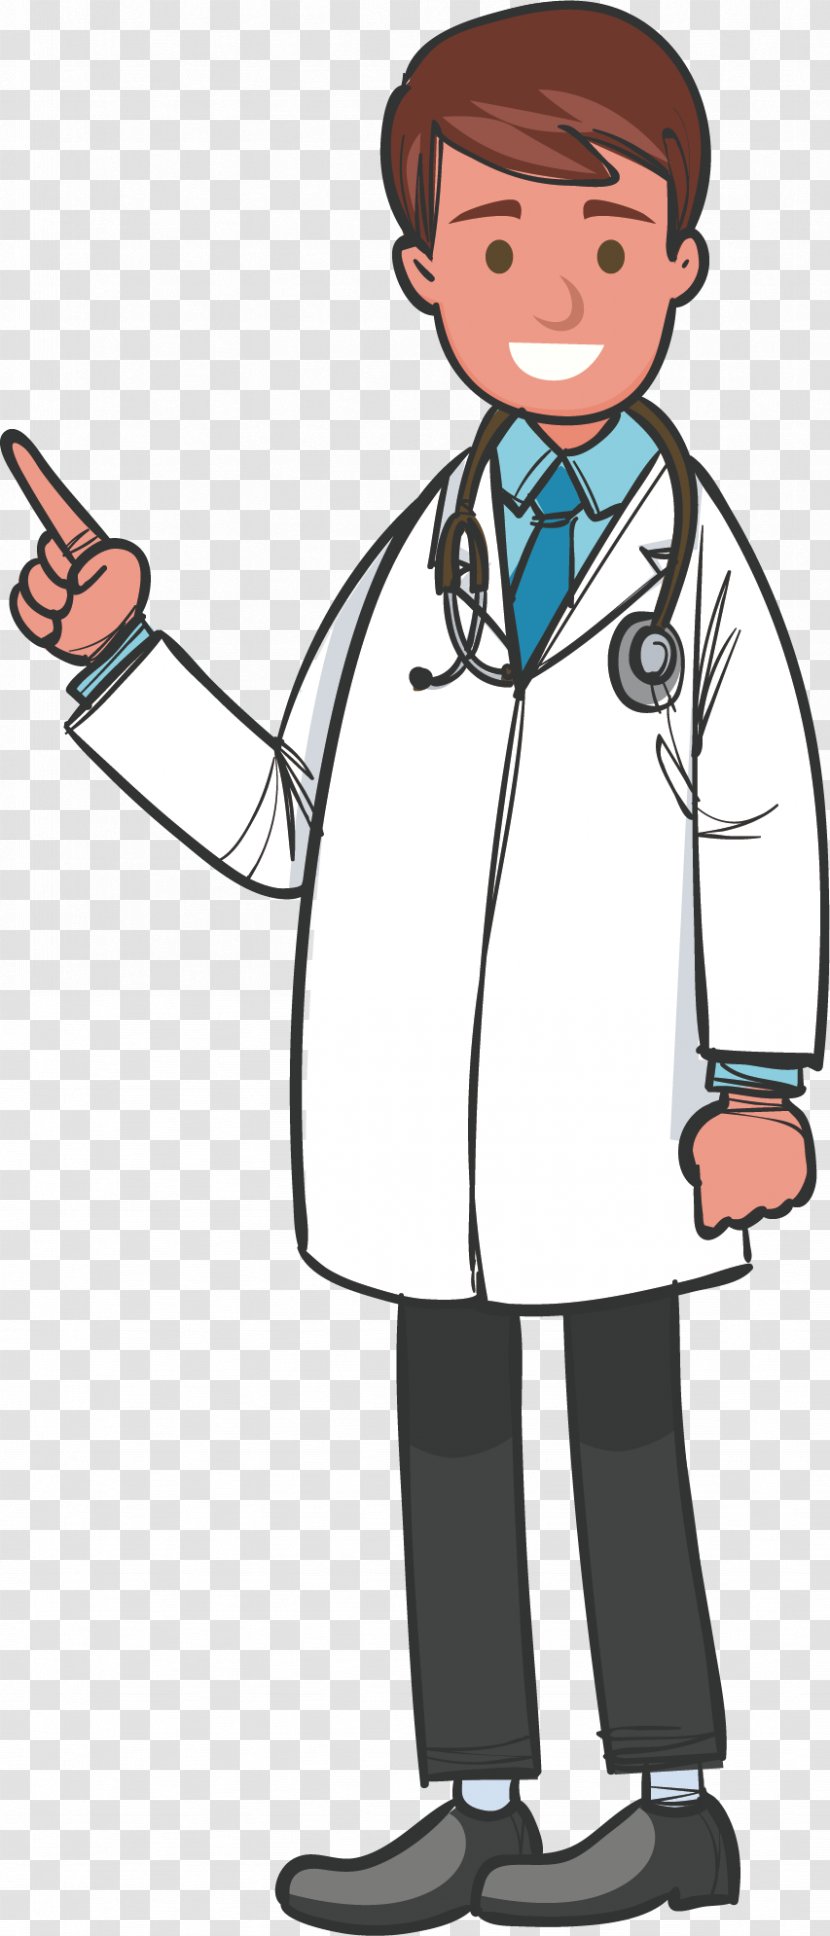 Physician Clip Art - Profession - Doctor Lectures Transparent PNG